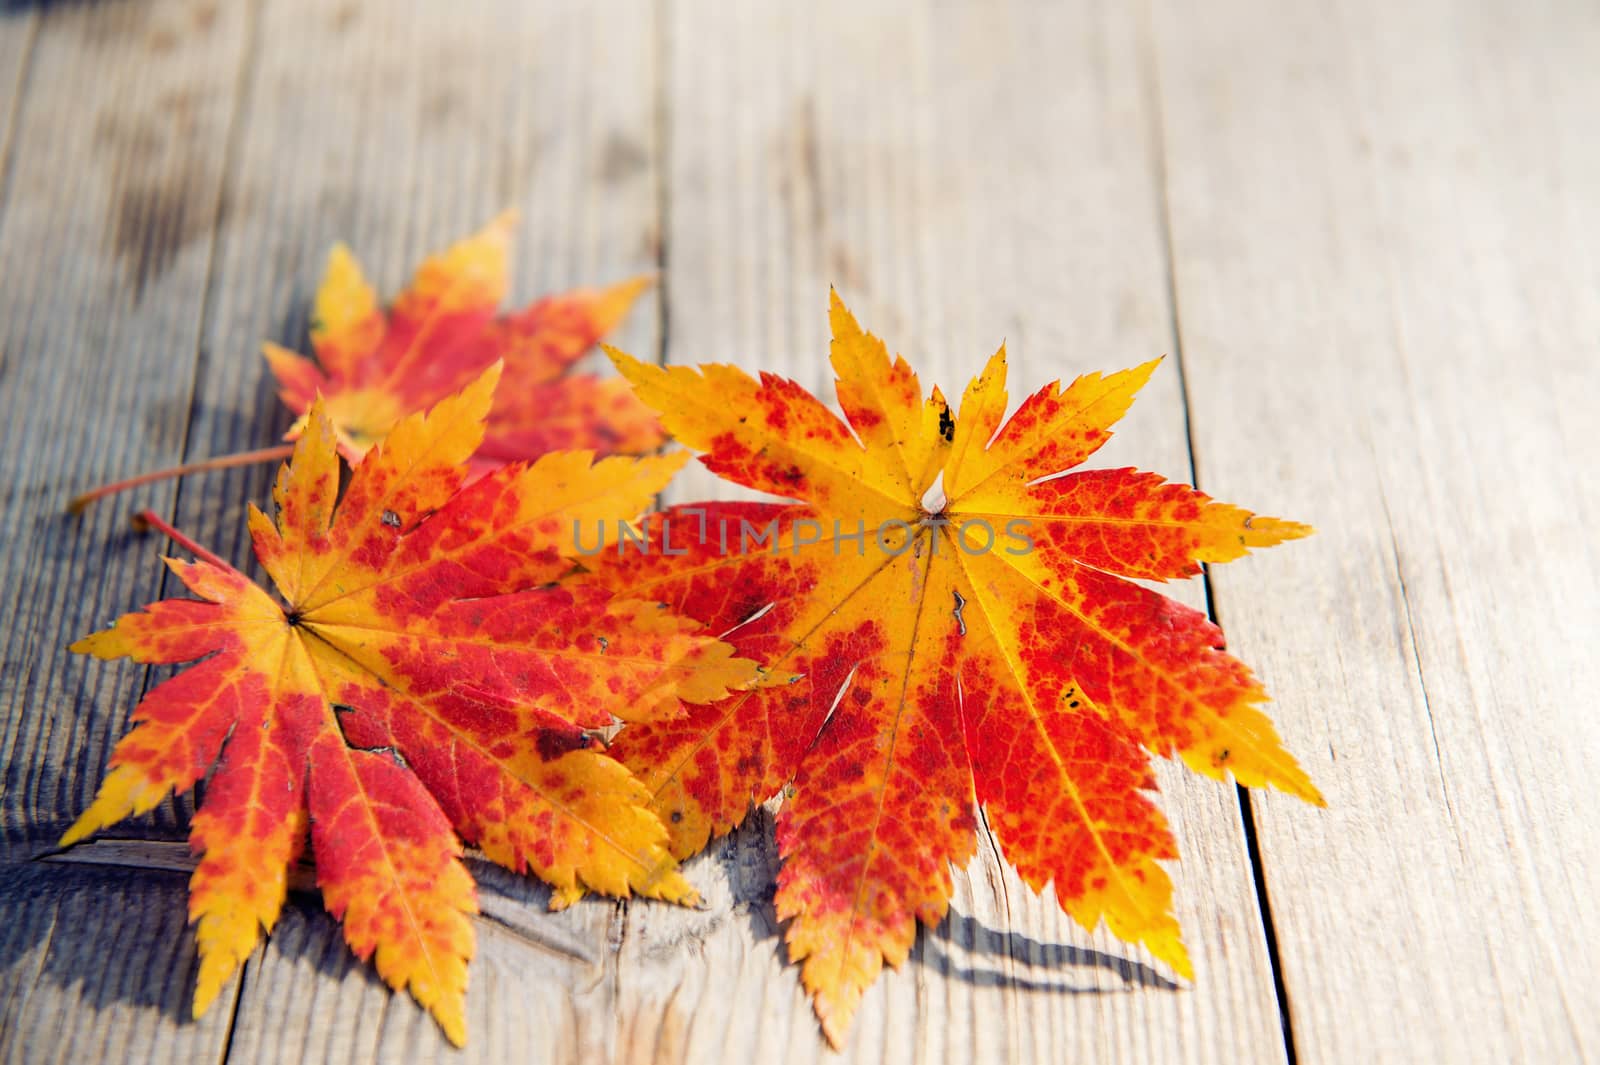 Autumn maple leaves on wooden background. by gutarphotoghaphy